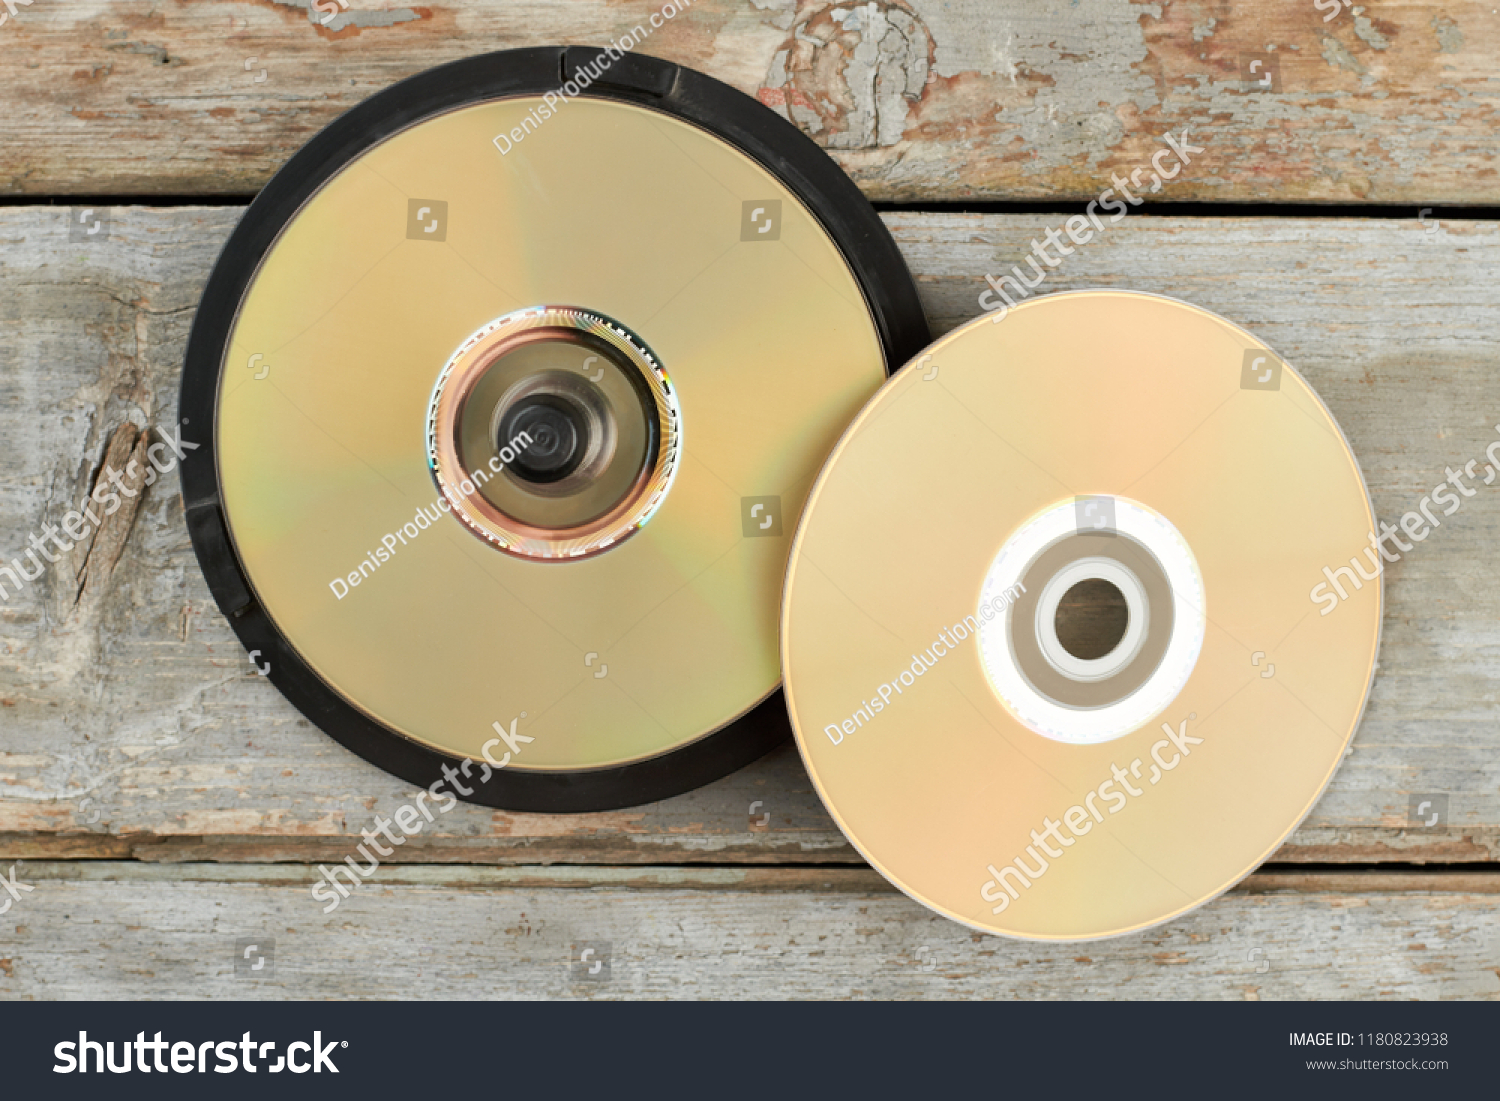 DVD discs on old wooden background. Stack of compact disks on rustic wooden surface. Outdated digital data storage. #1180823938